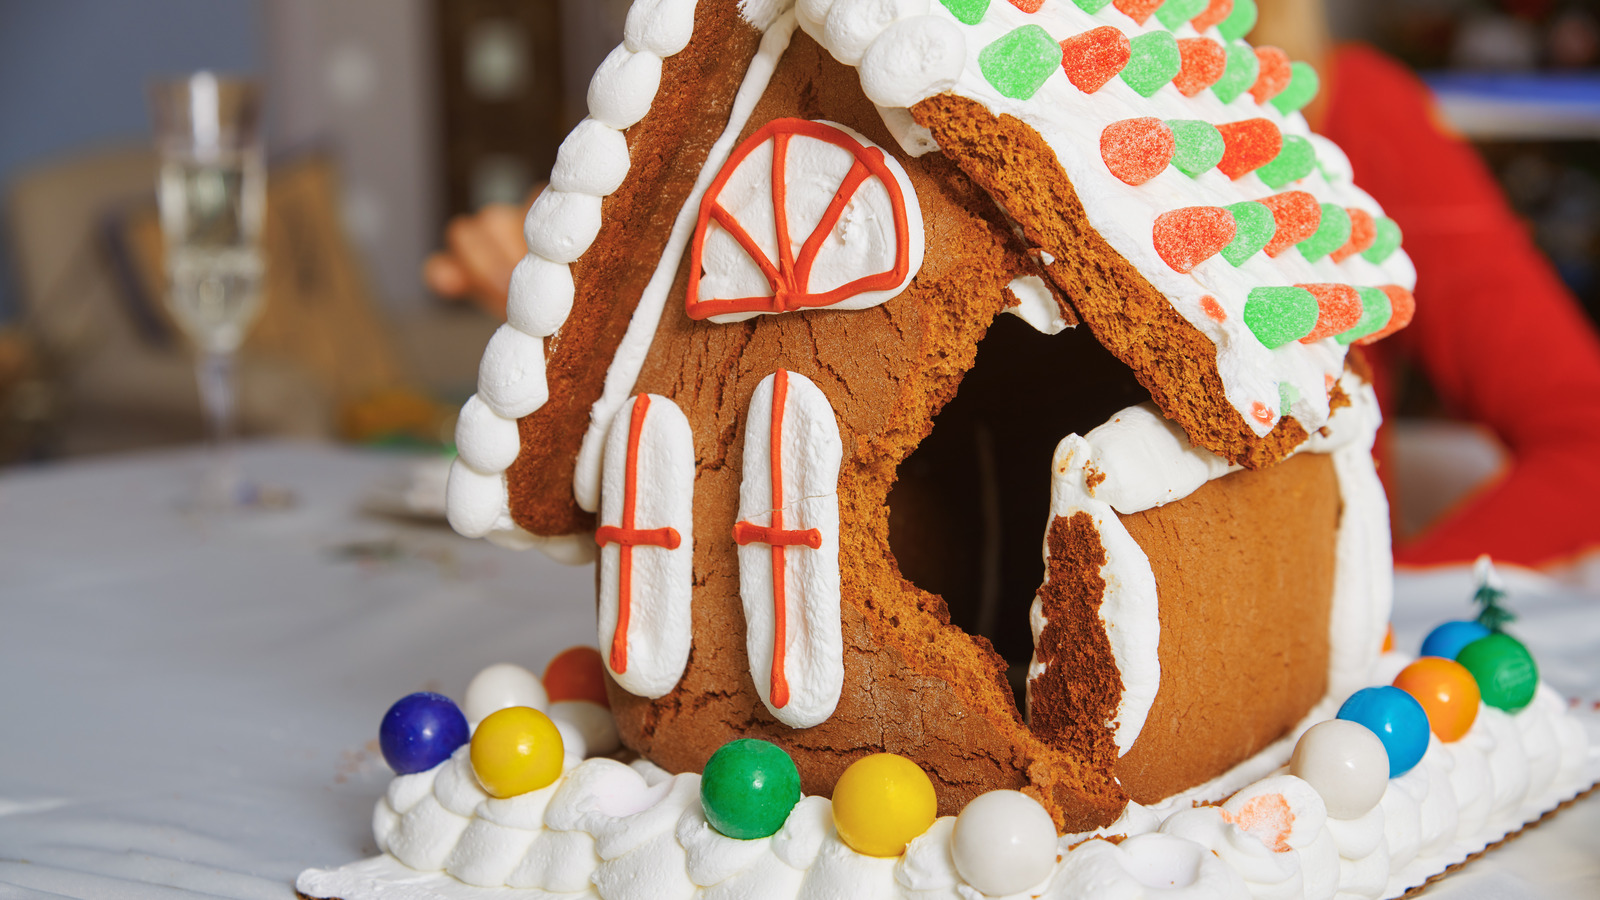 https://www.foodrepublic.com/img/gallery/mistakes-everyone-makes-when-baking-gingerbread-houses/l-intro-1701983454.jpg